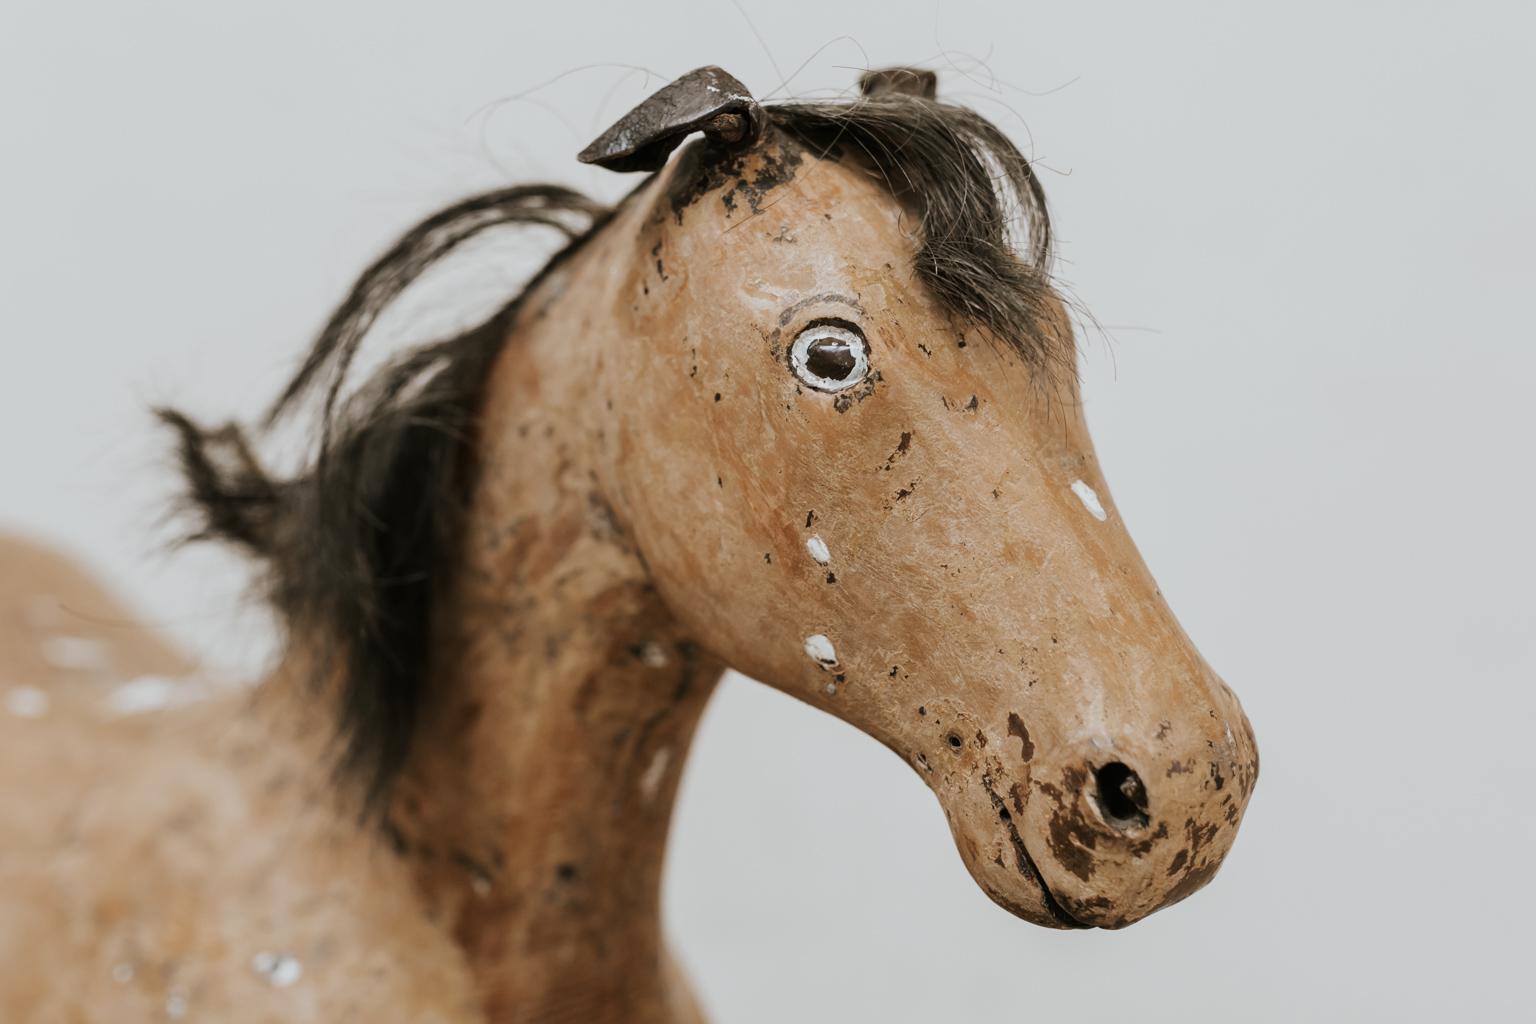 Charming wooden toy horse, always a great decorative item in a child’s room.